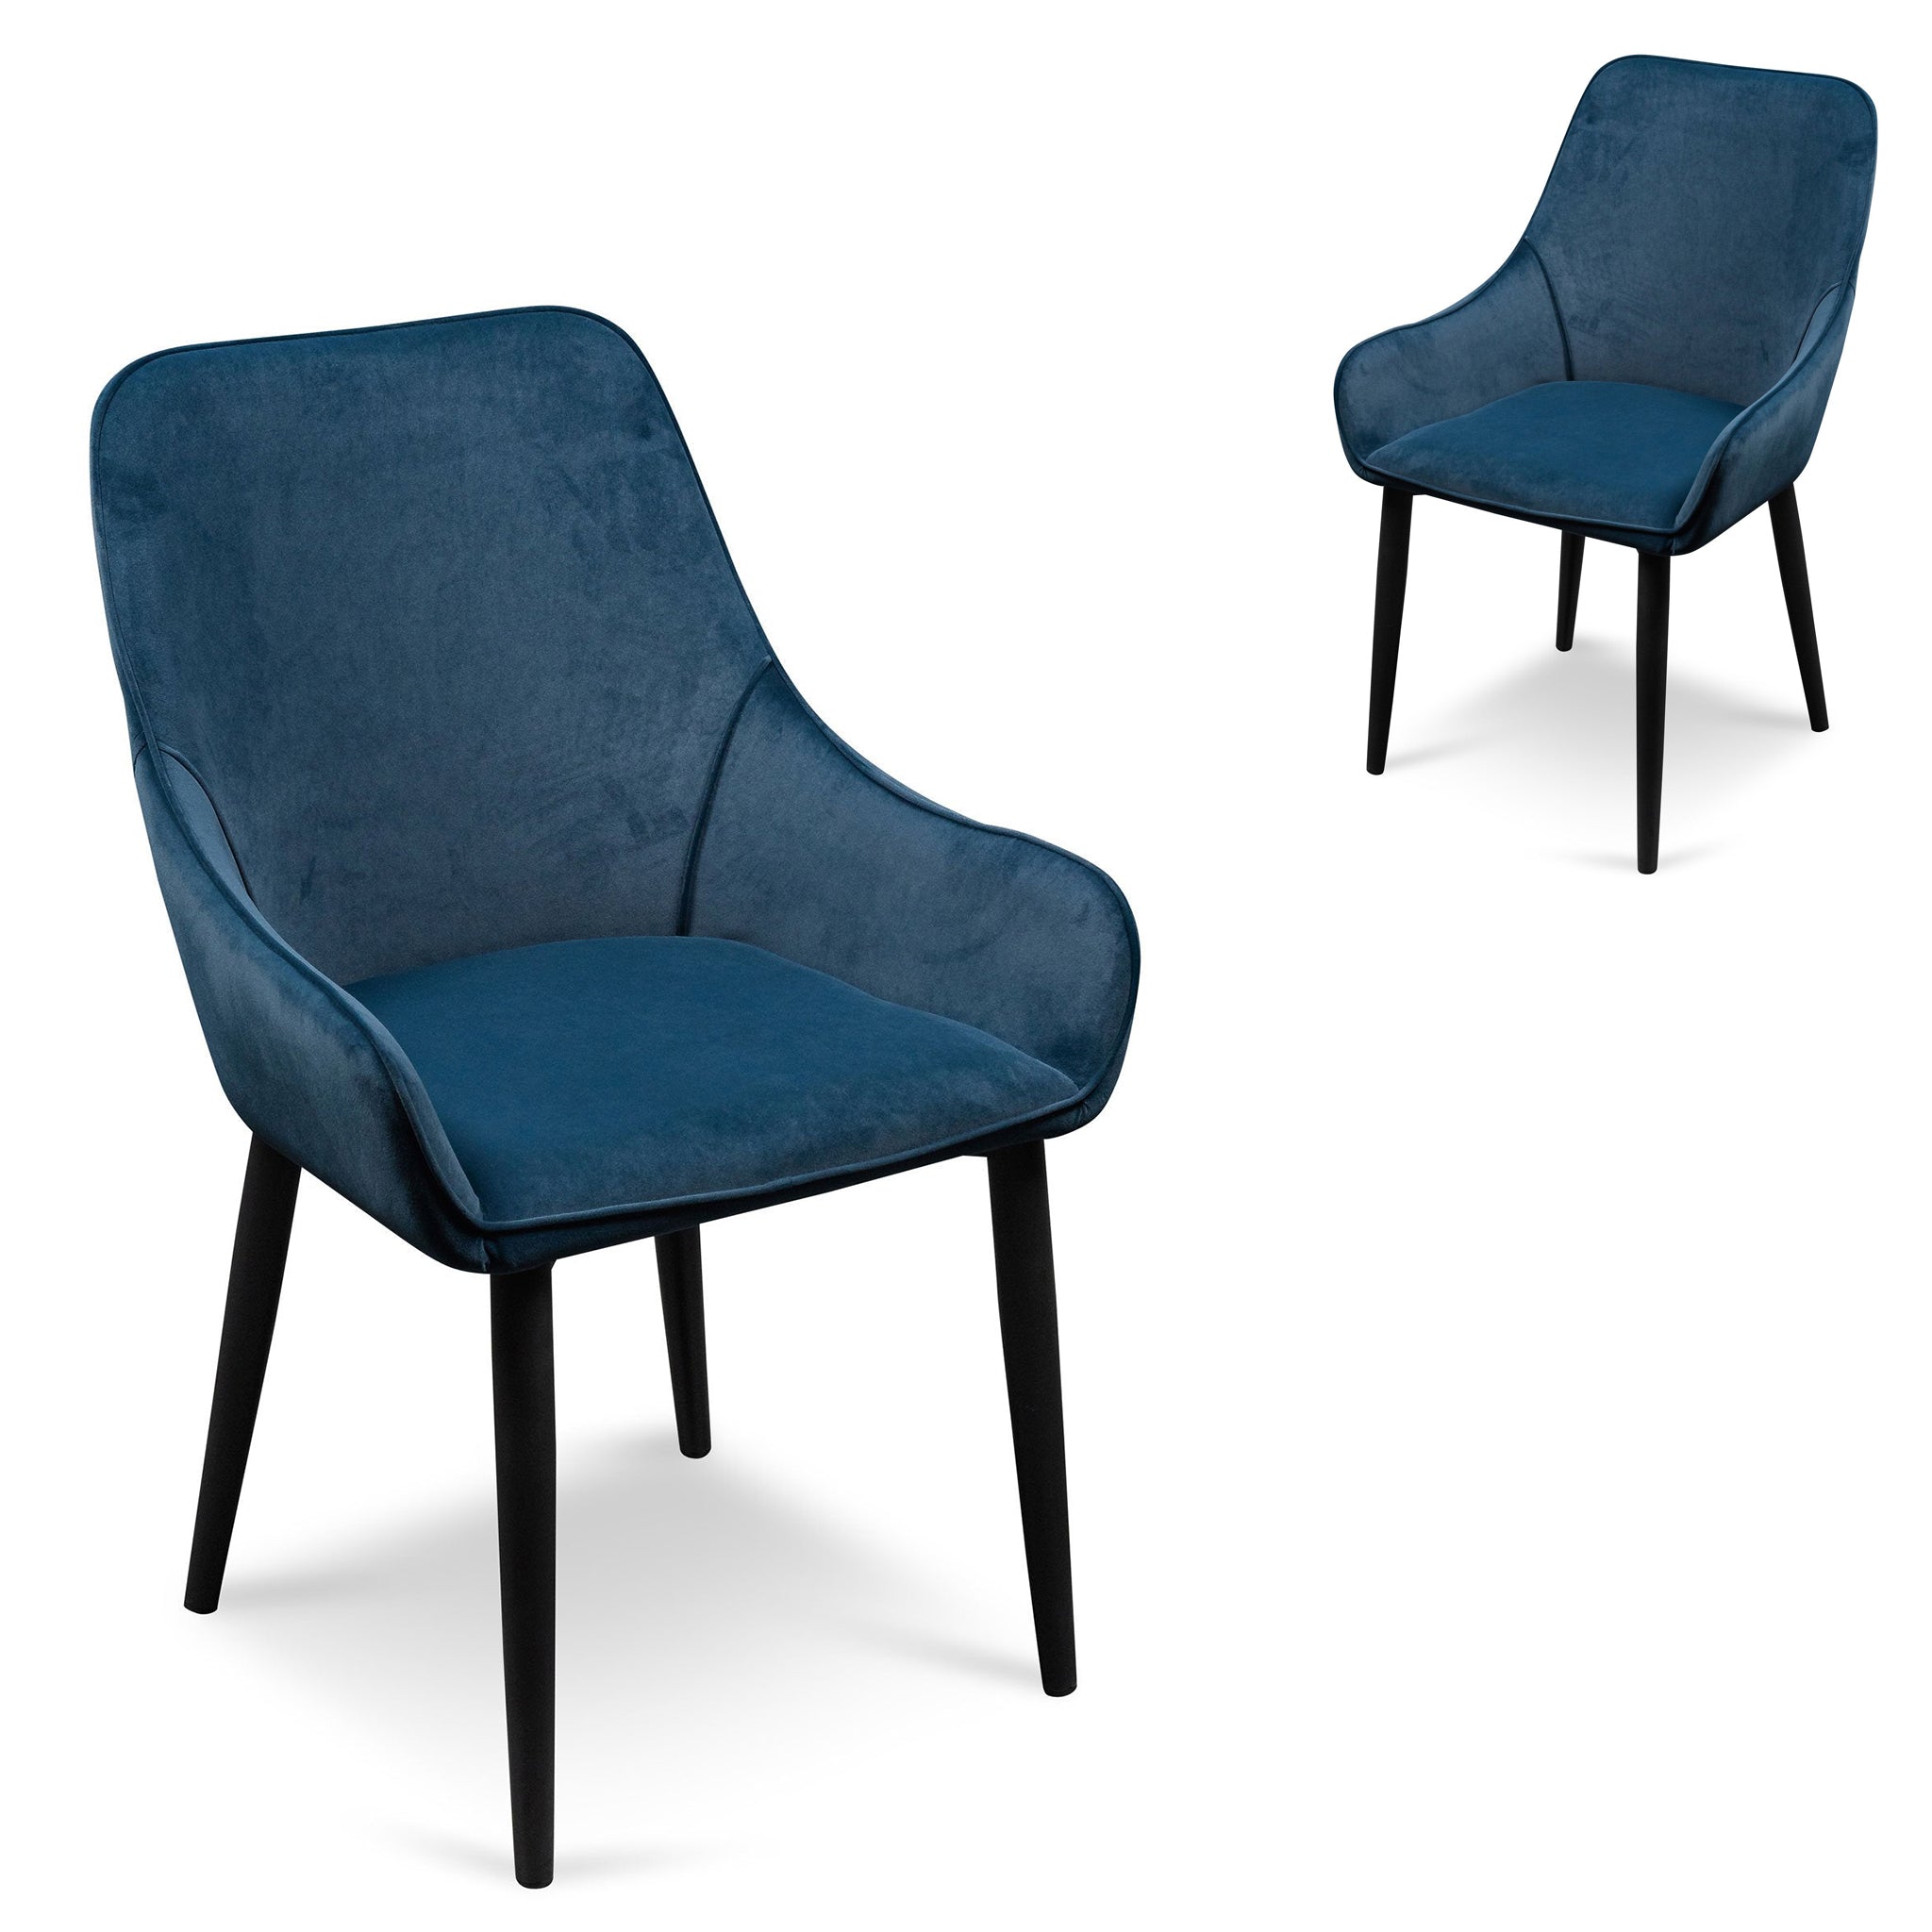 Set of 2 Lina Dining Chair - Navy Blue Velvet - Dining Chairs